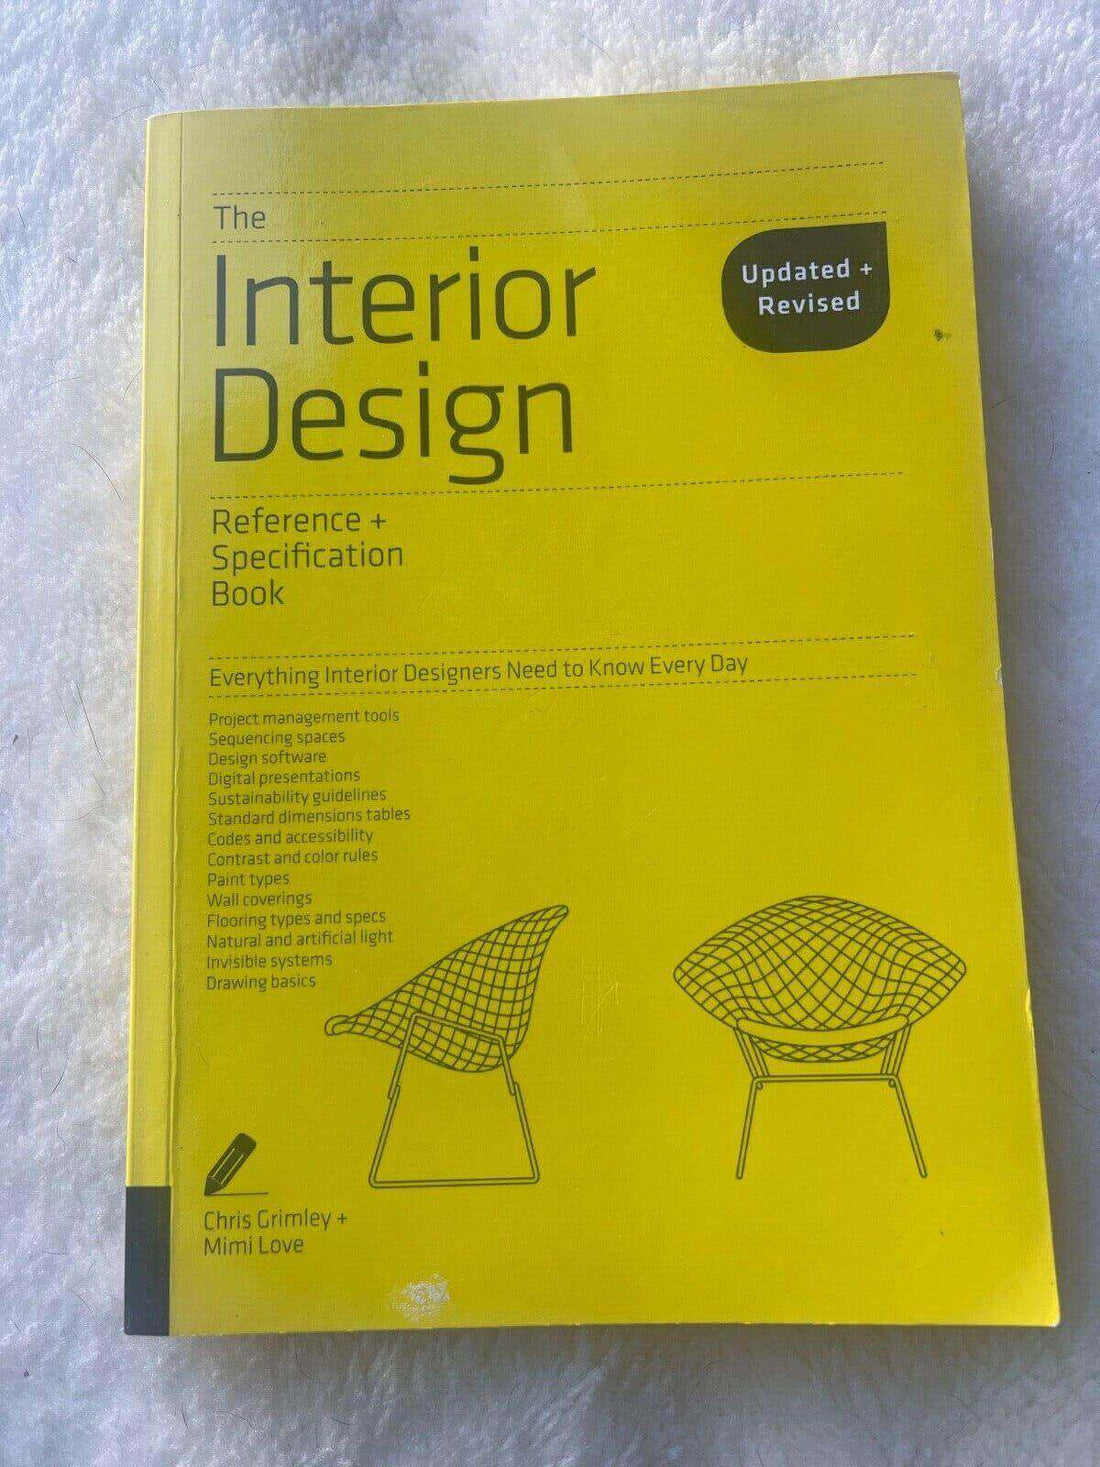 Book Review: "The Interior Design Reference Specification Book" - Your Ultimate Guide to Interior Design